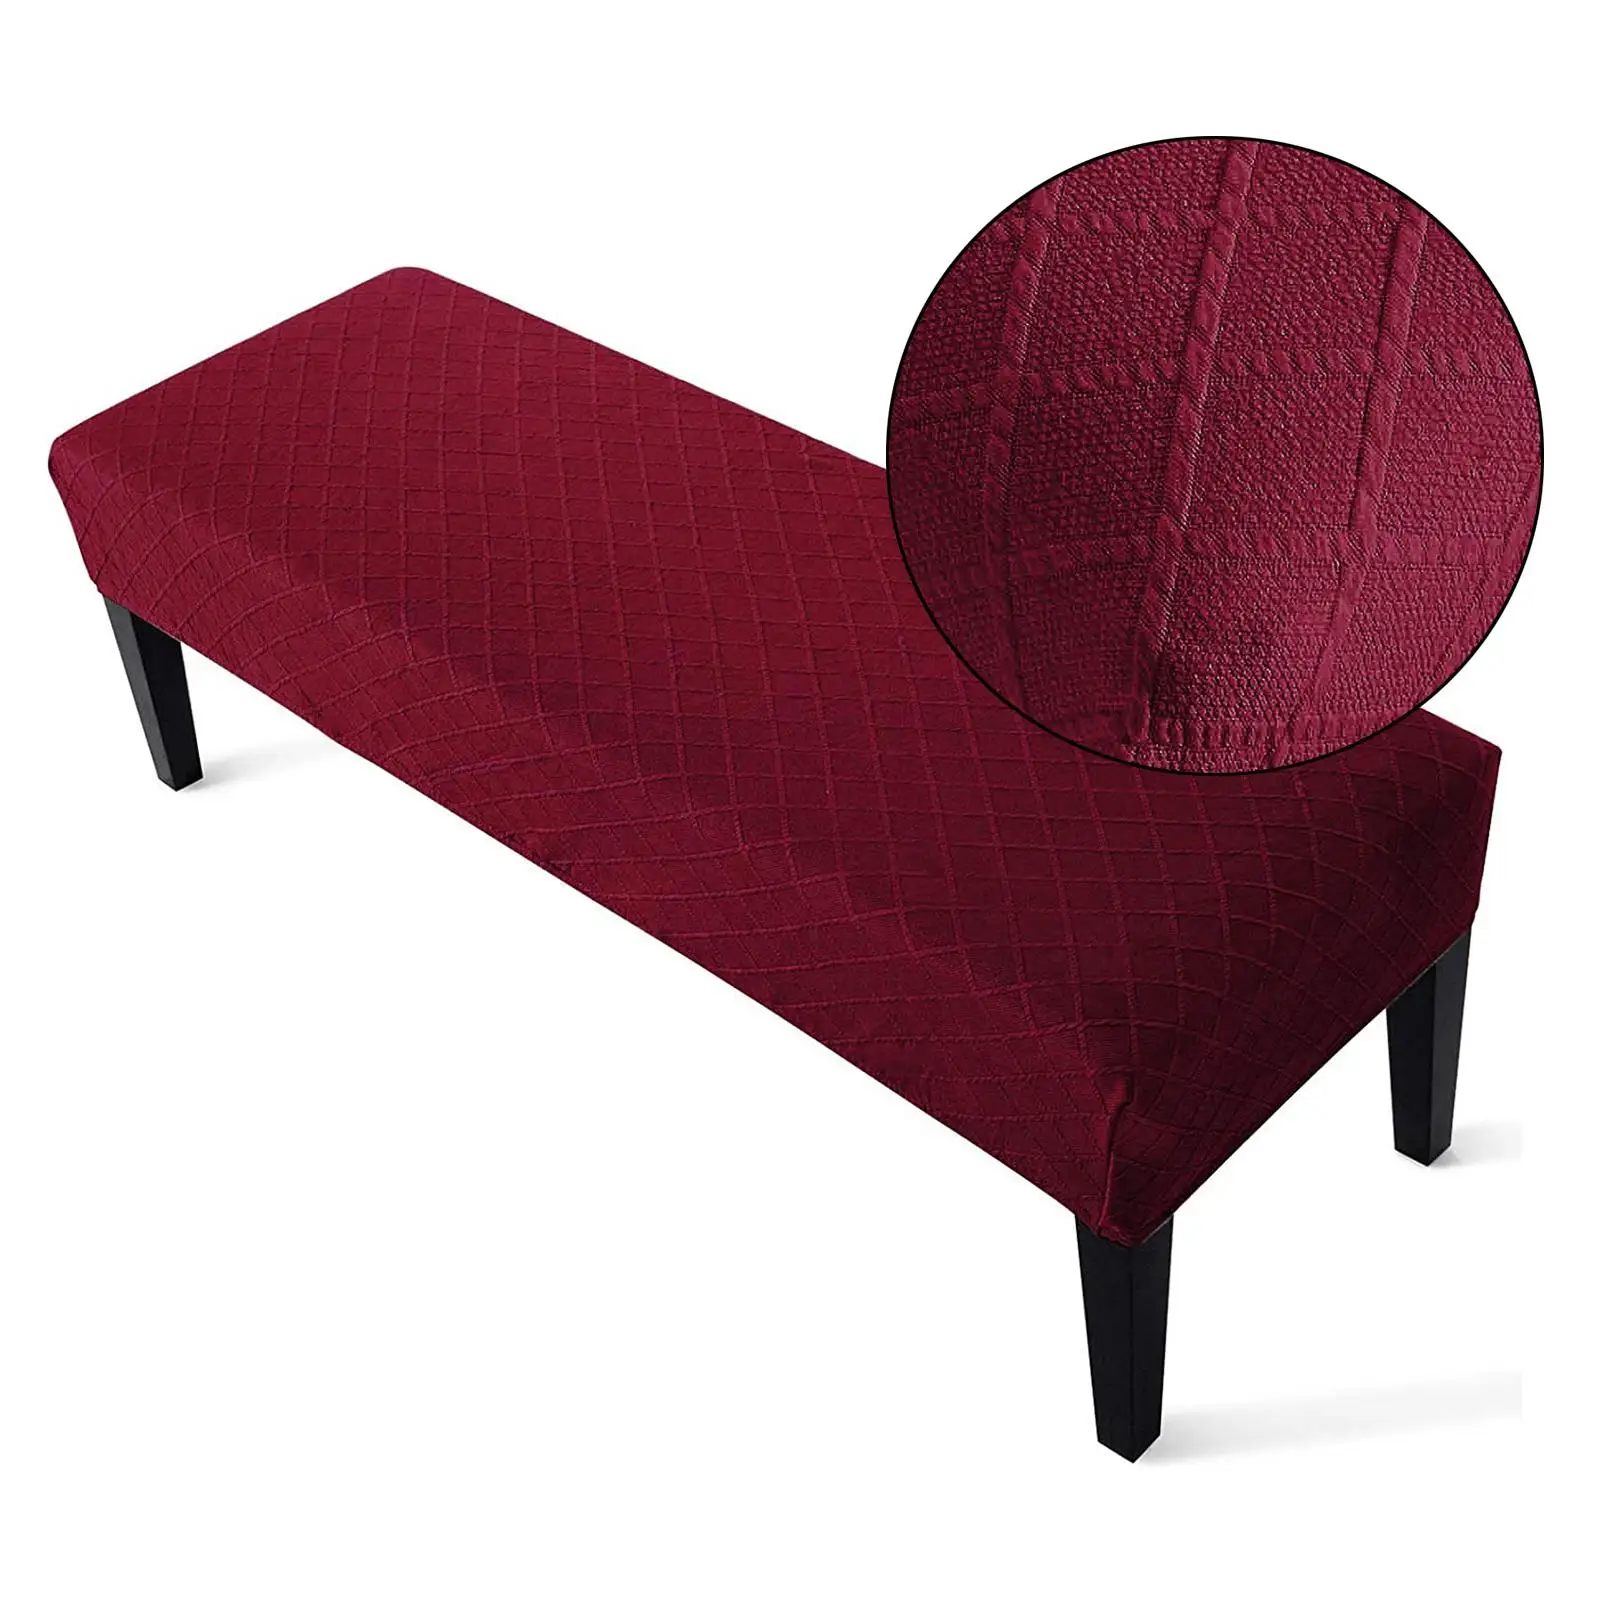 Bench Covers for Dining Room Soft Thick Velvet Bench Slipcover Bed Bench Cover